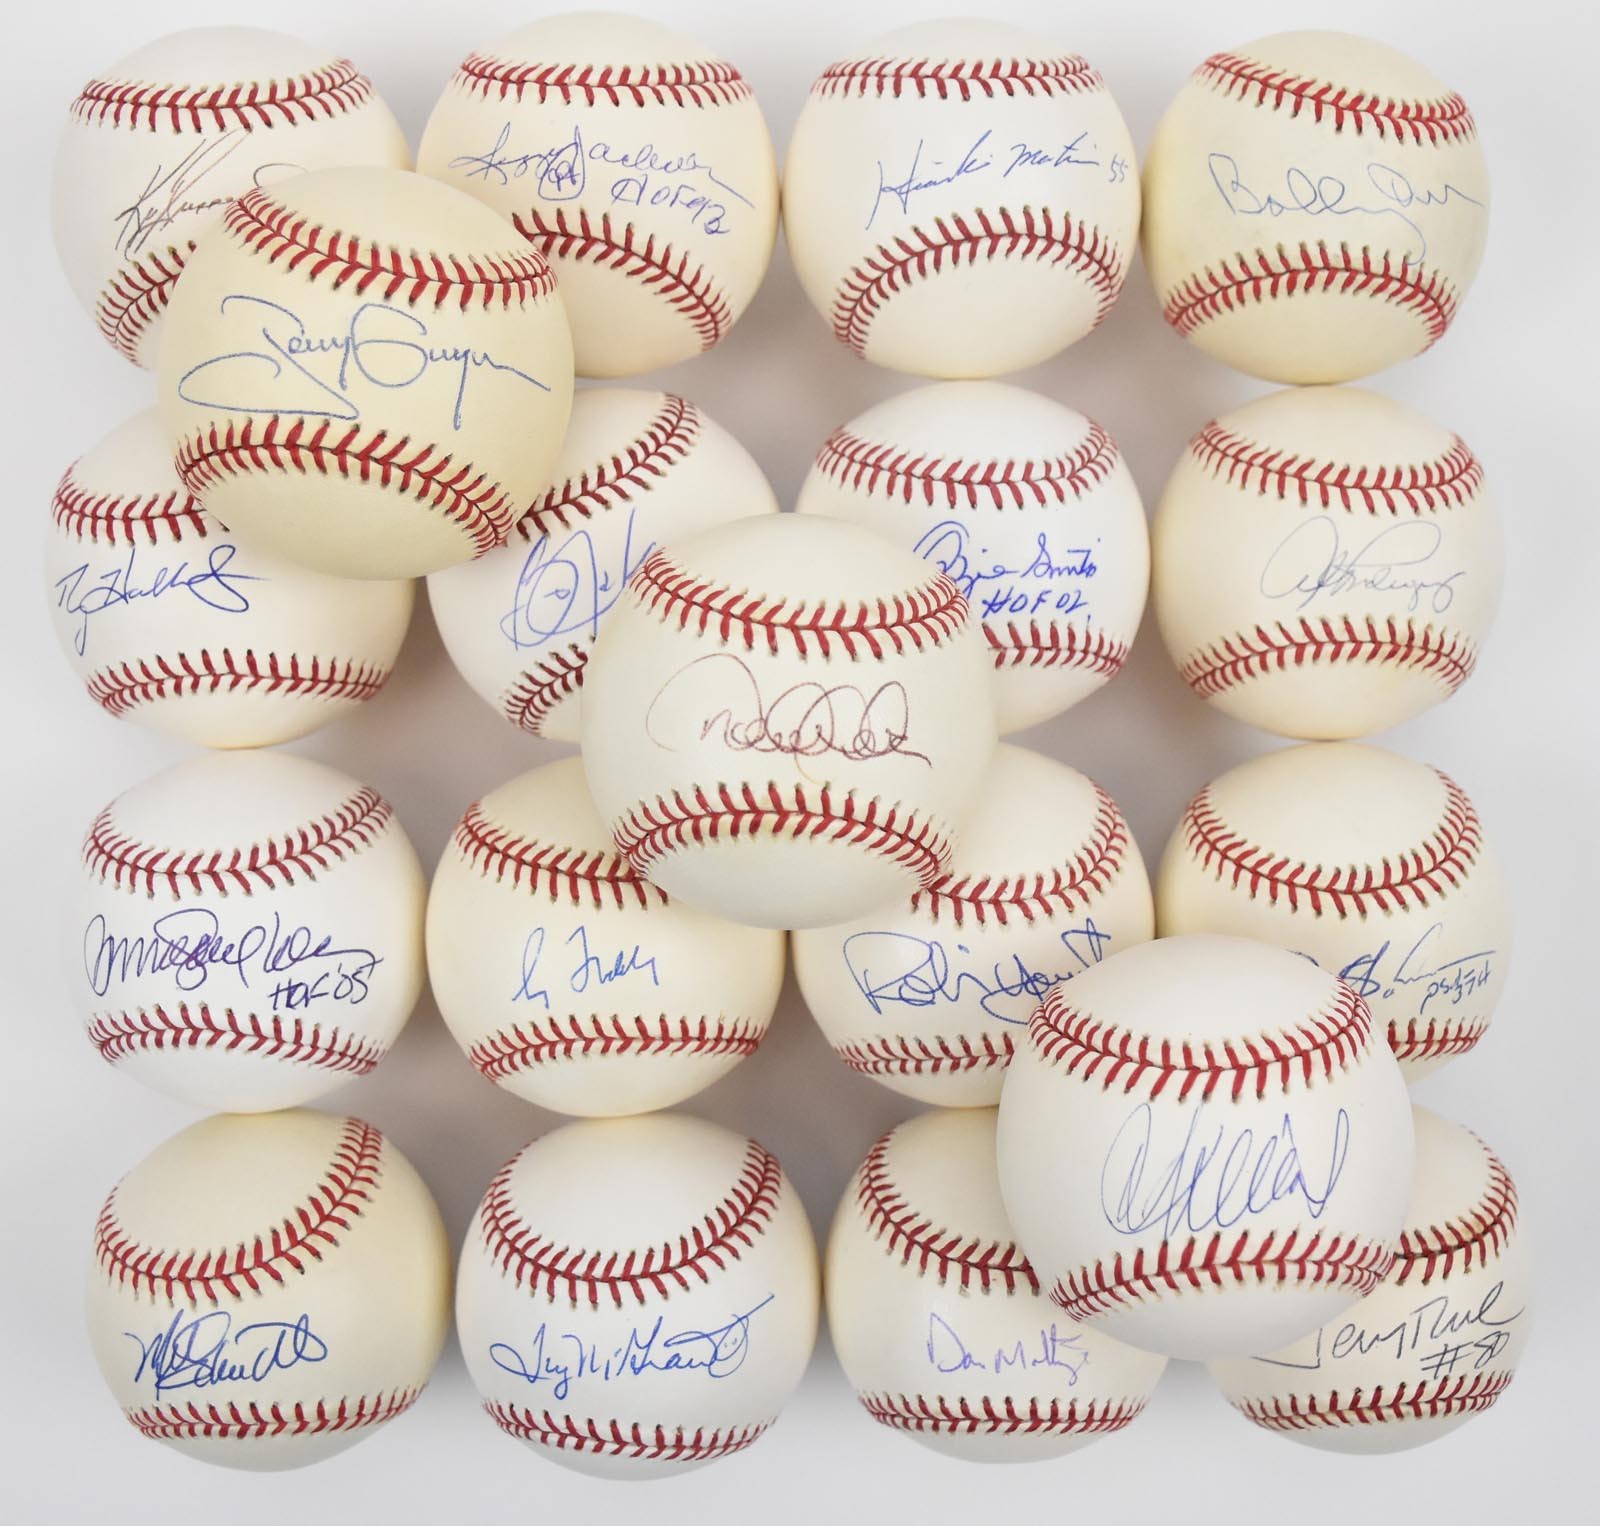 Baseball Autographs - Large Single Signed Baseball Collection with Many Hall of Famers - Jeter, Ichiro, Orr, Griffey Jr. (145+)